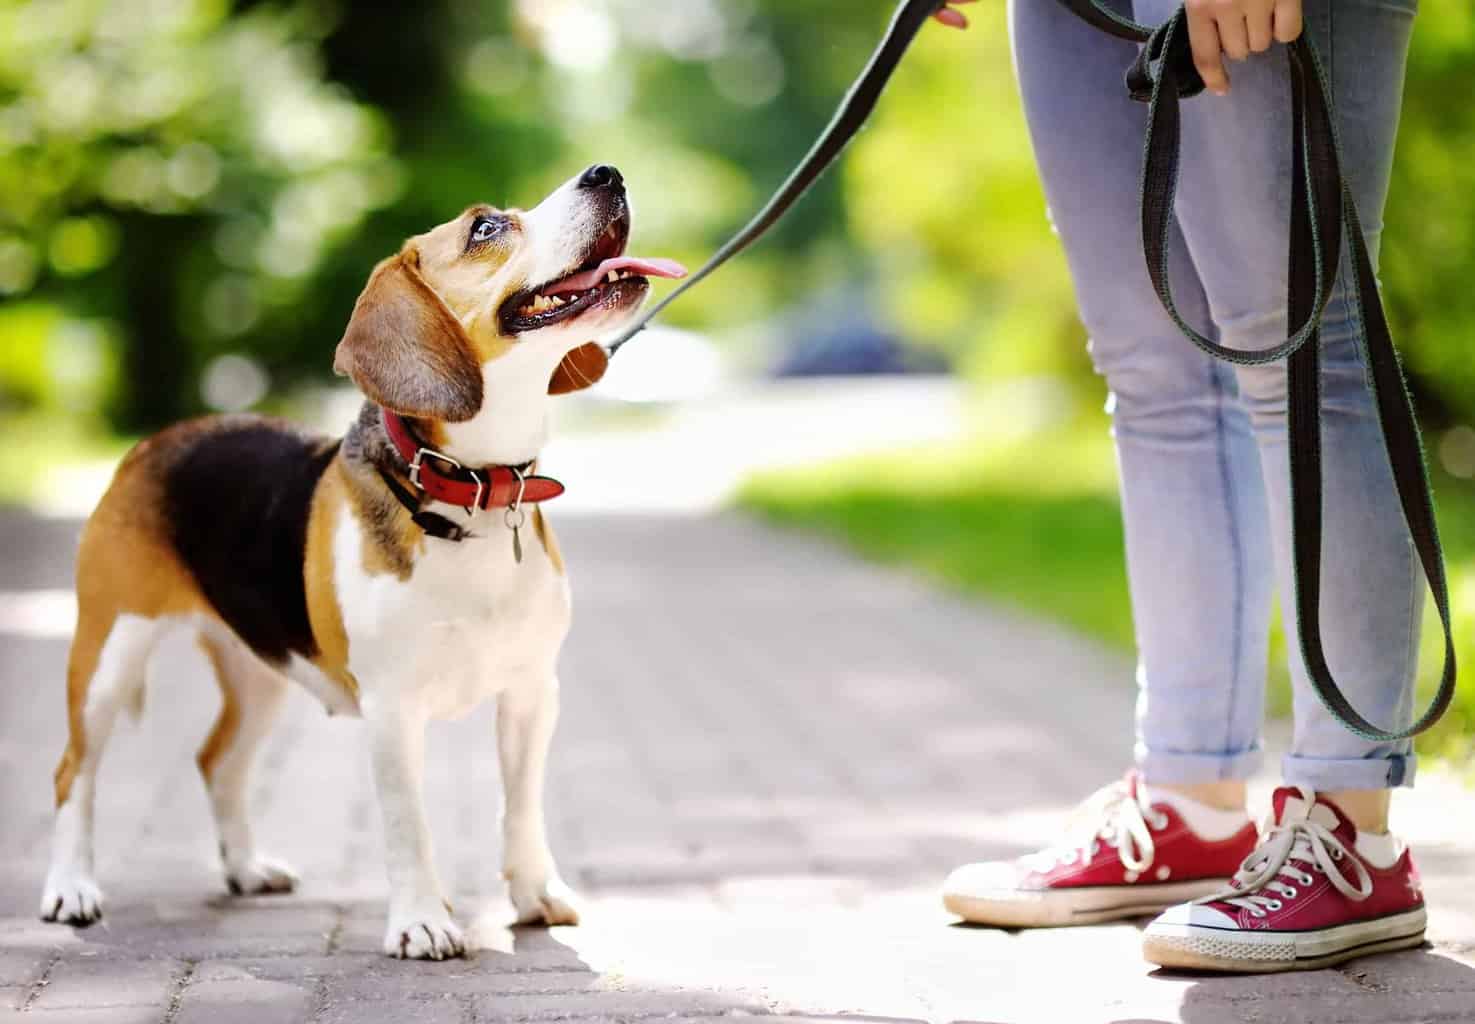 Owner takes happy Beagle for a perfect dog walk. A perfect dog walk should be fun for both you and your dog. Neither of you will enjoy that time if the dog constantly pulls you.